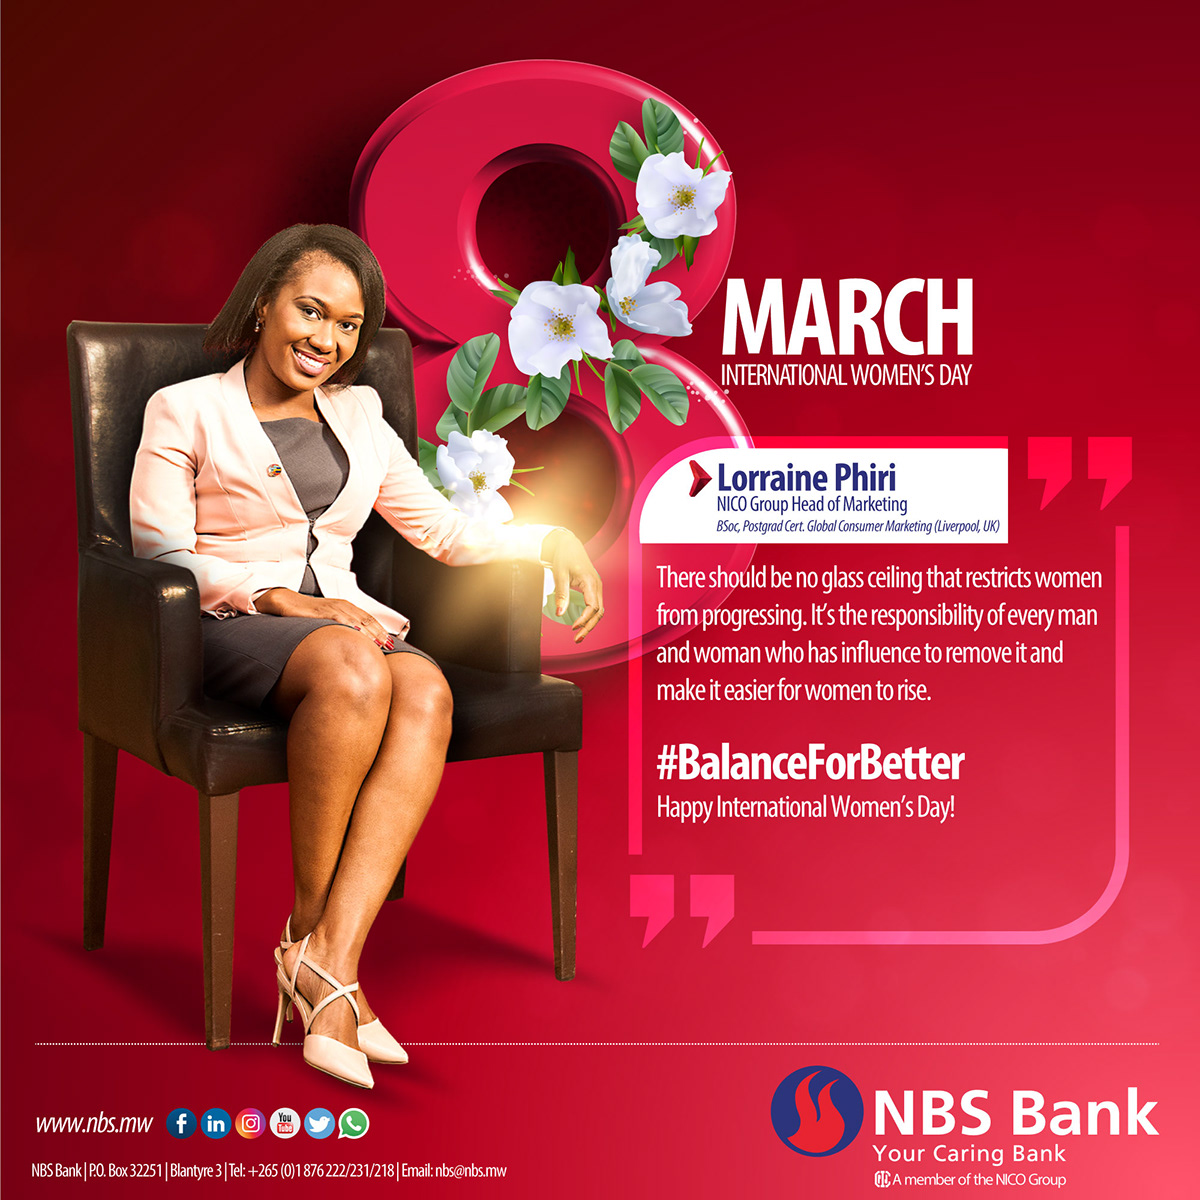 BalanceForBetter International women's day 8 march NBS Bank malawi red brigade Leadership manager